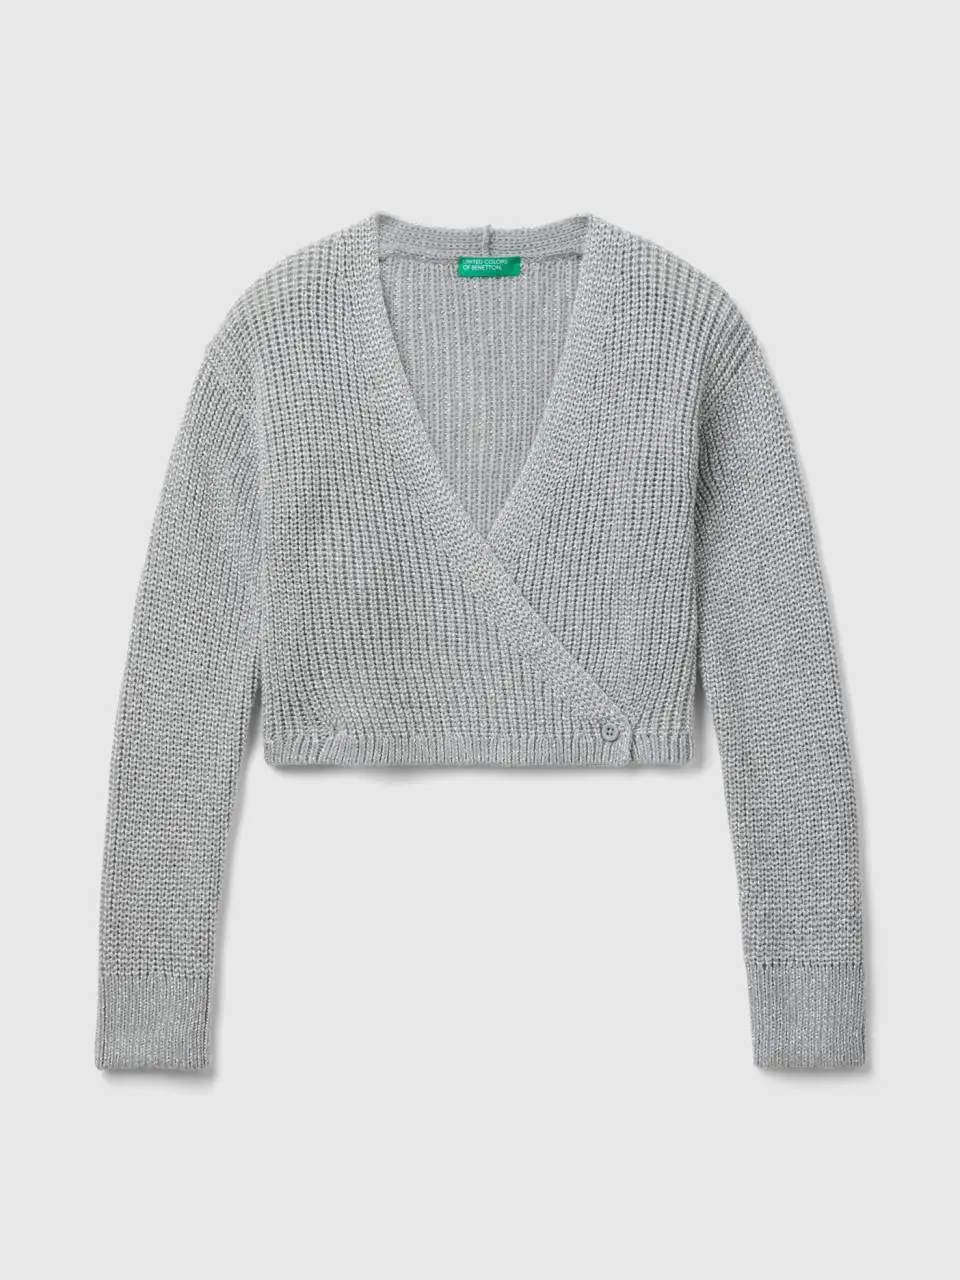 Benetton cropped cardigan with lurex. 1